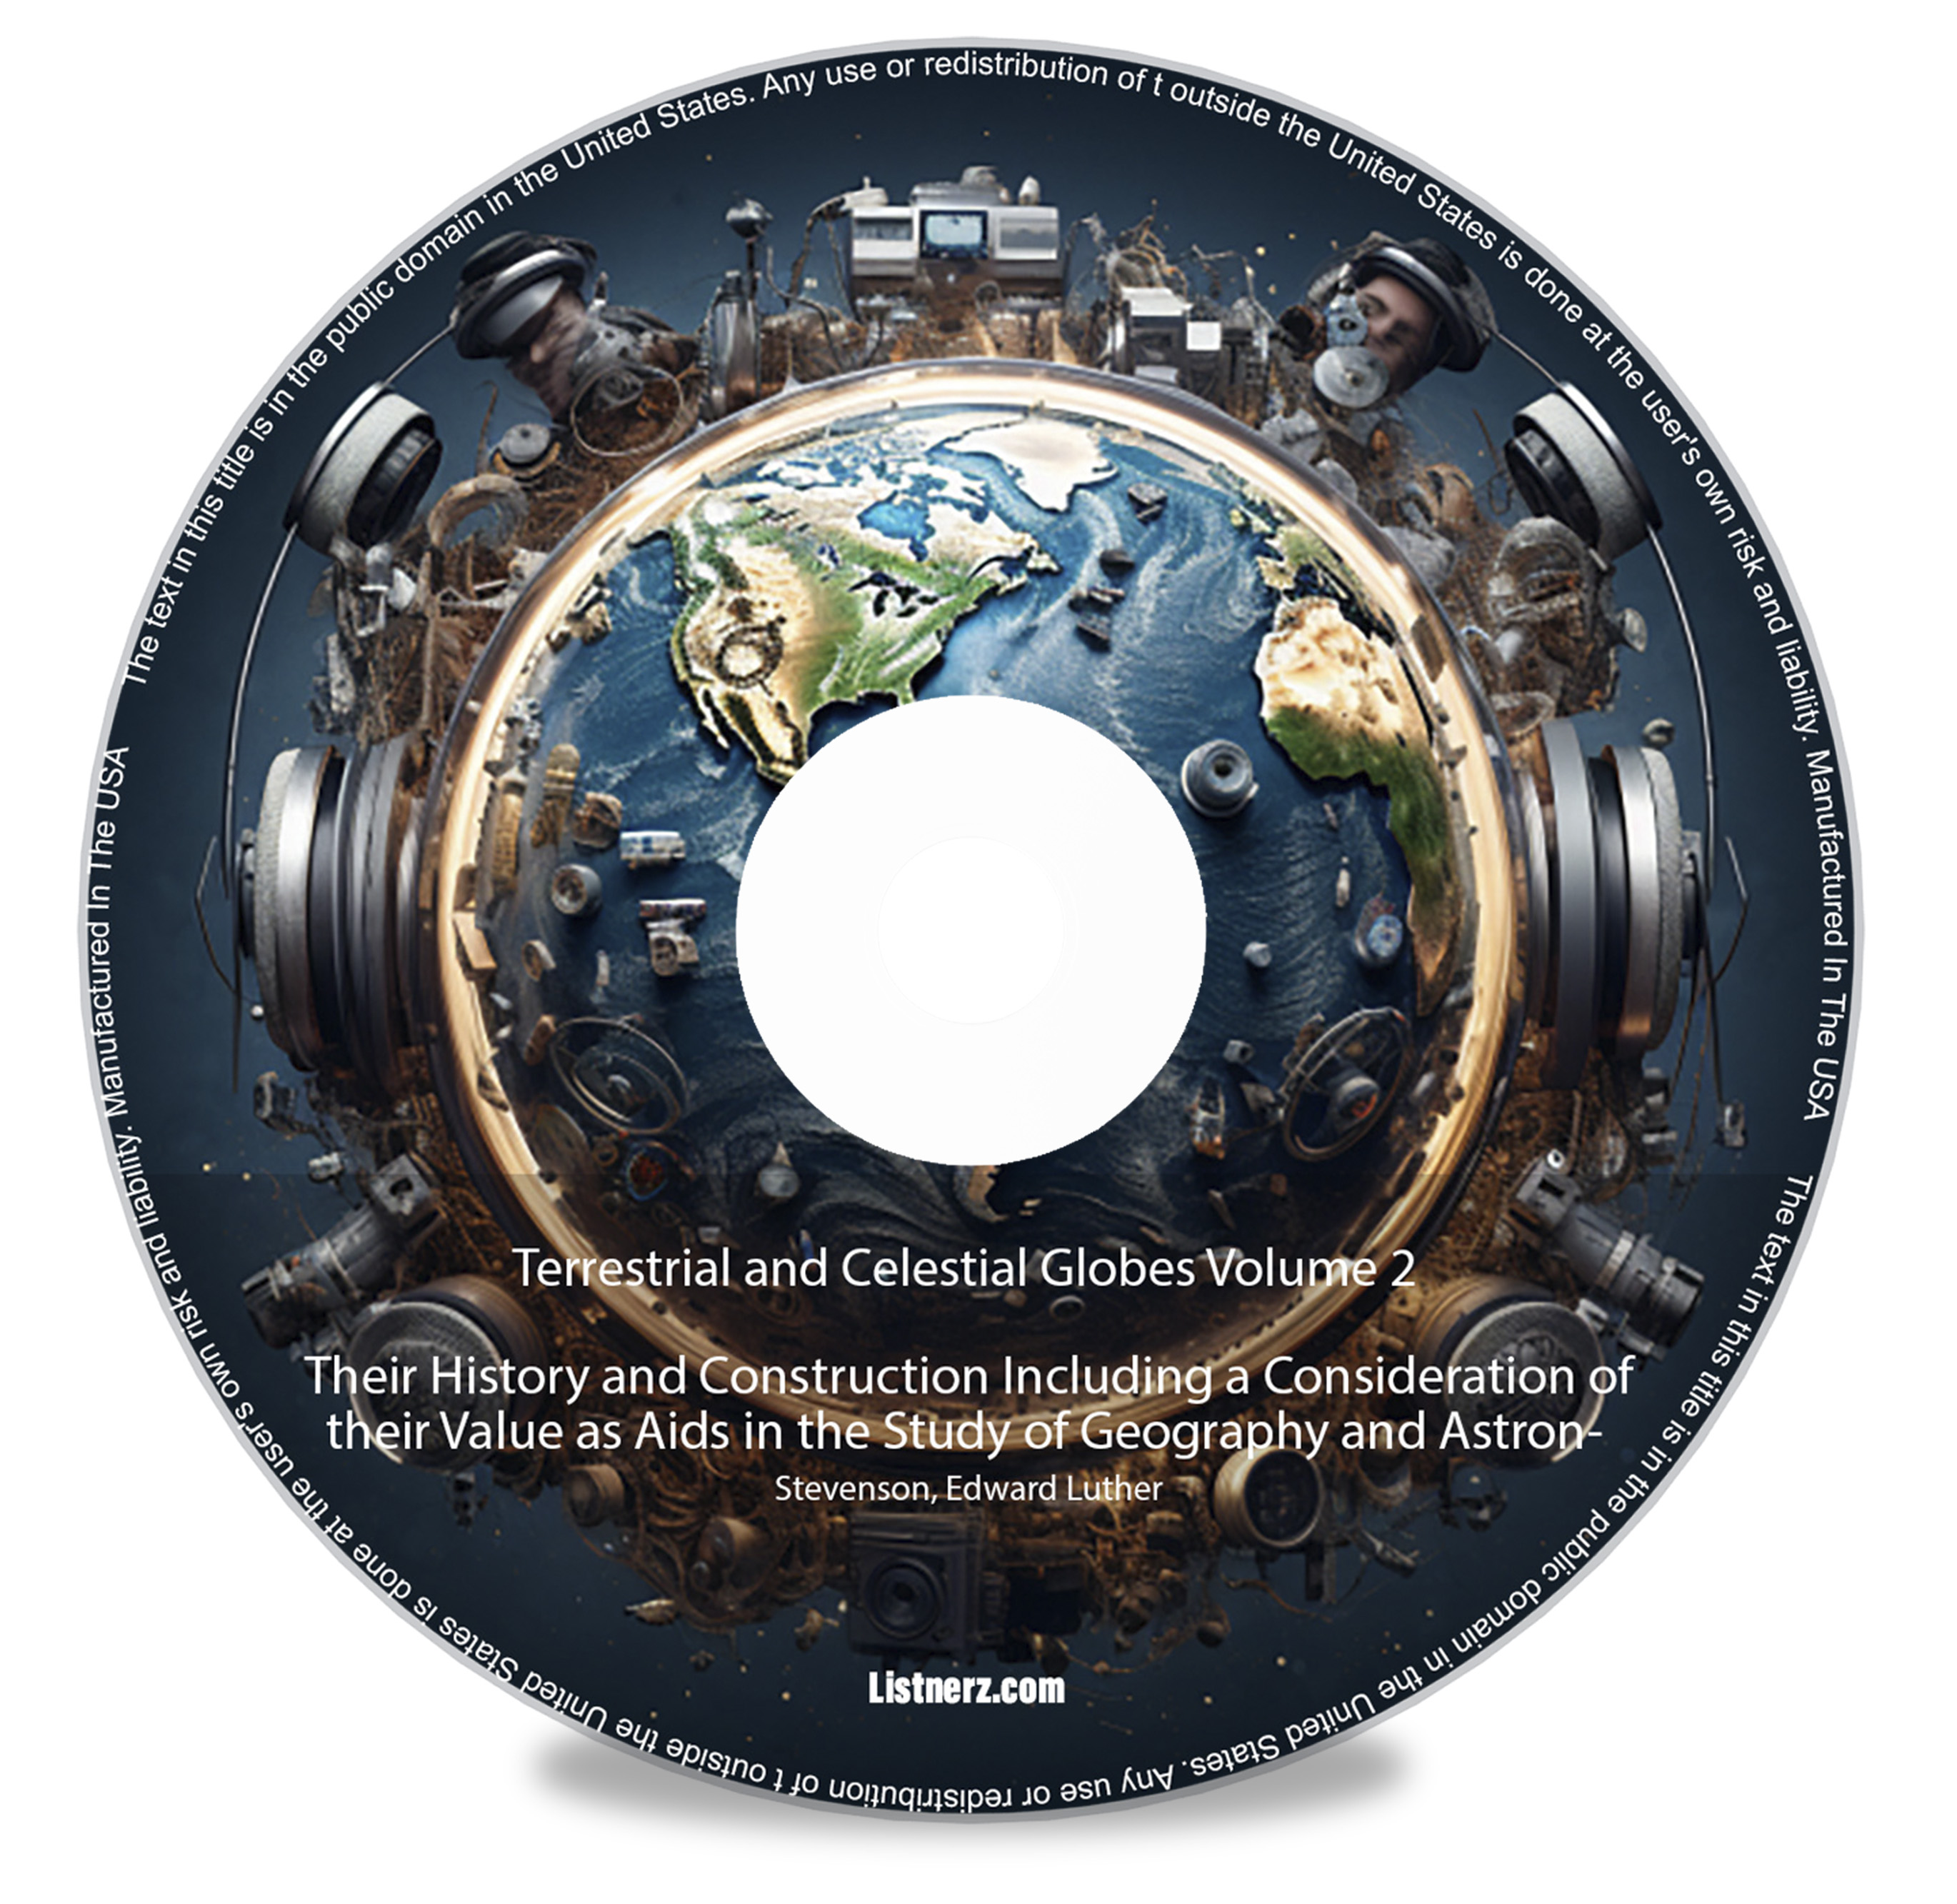 Terrestrial and Celestial Globes Volume 2
 
 Their History and Construction Including a Consideration of their Value as Aids in the Study of Geography and Astronomy